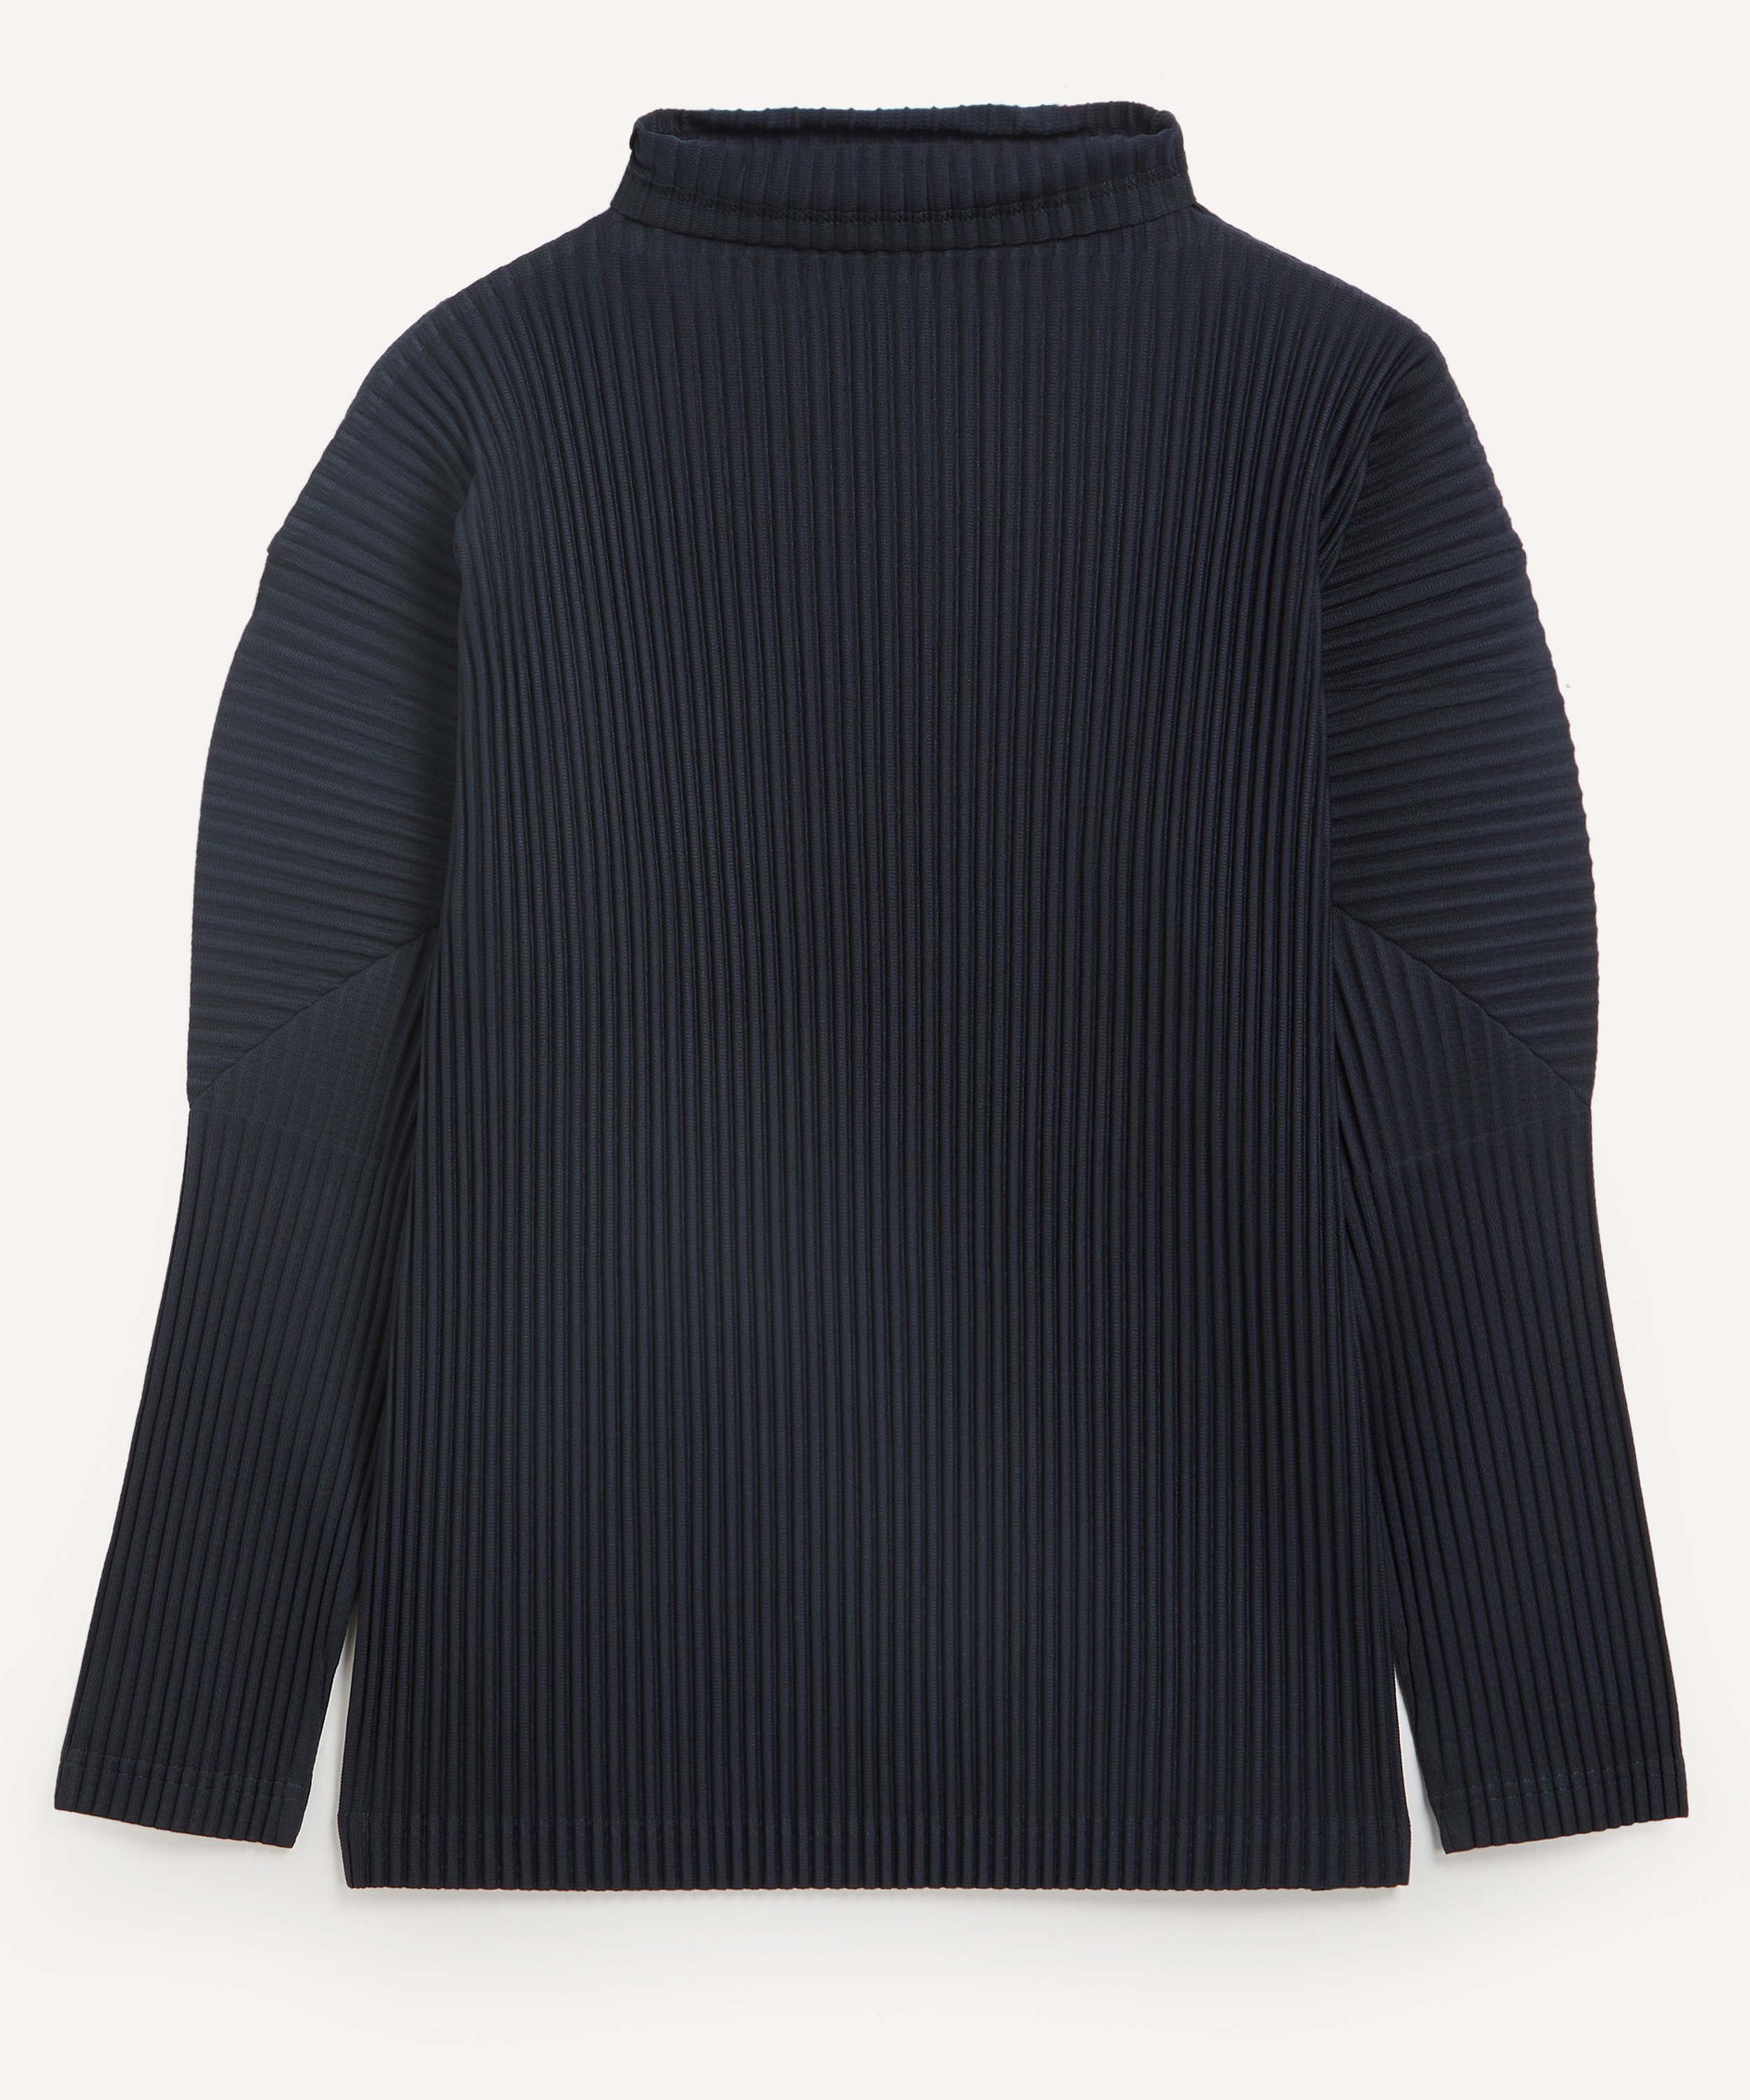 HOMME PLISSÉ ISSEY MIYAKE Core Pleated High-Neck Top | Liberty